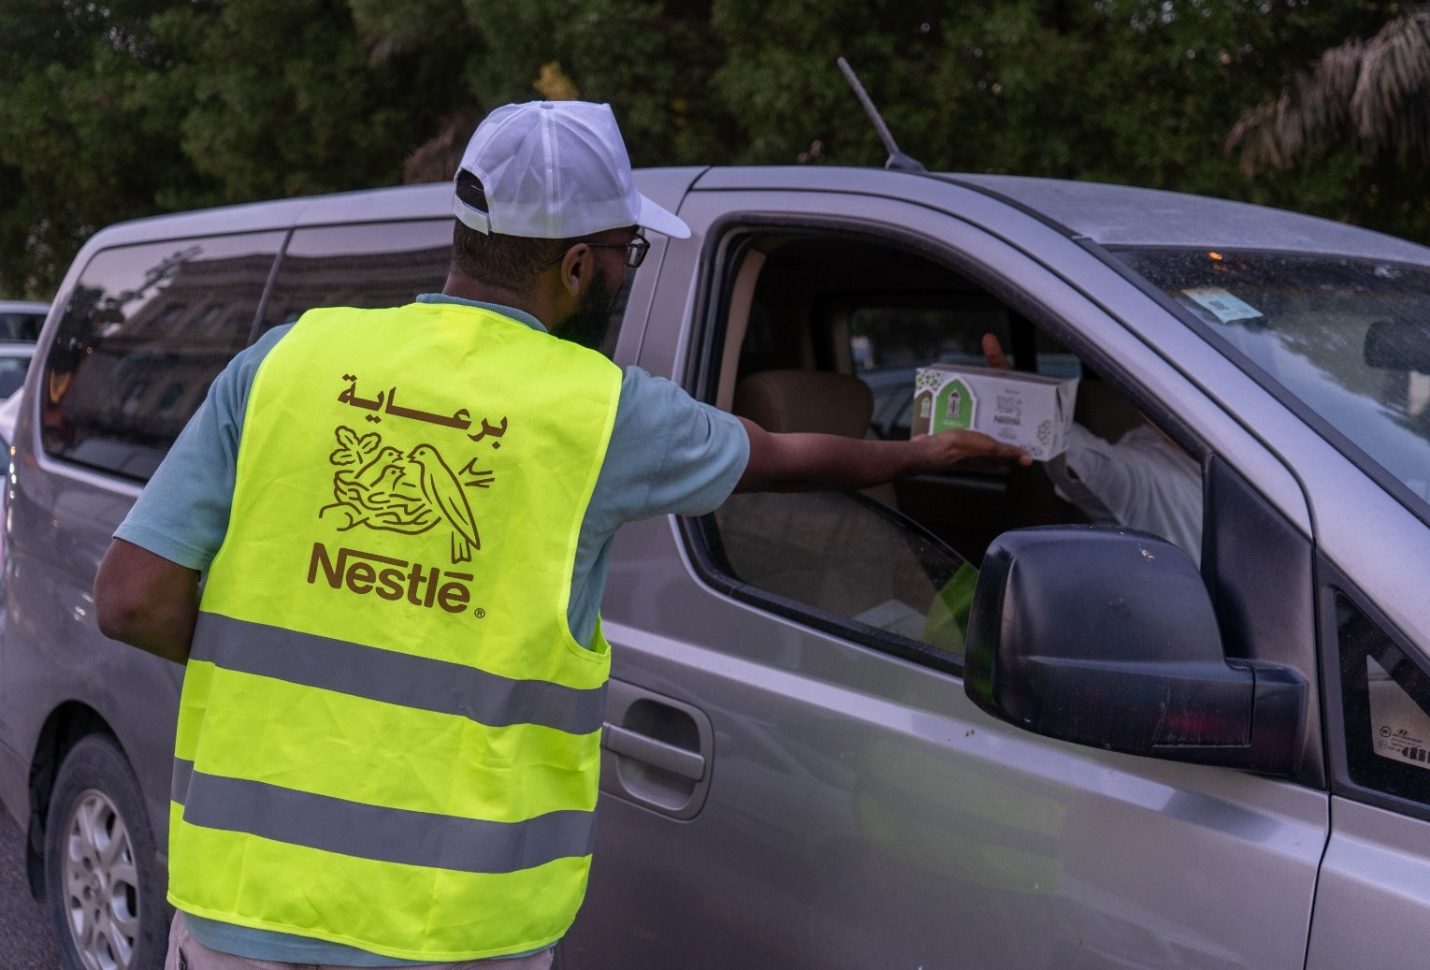 950 volunteers engaged in Nestlé’s 1 mln meal campaign in Saudi Arabia